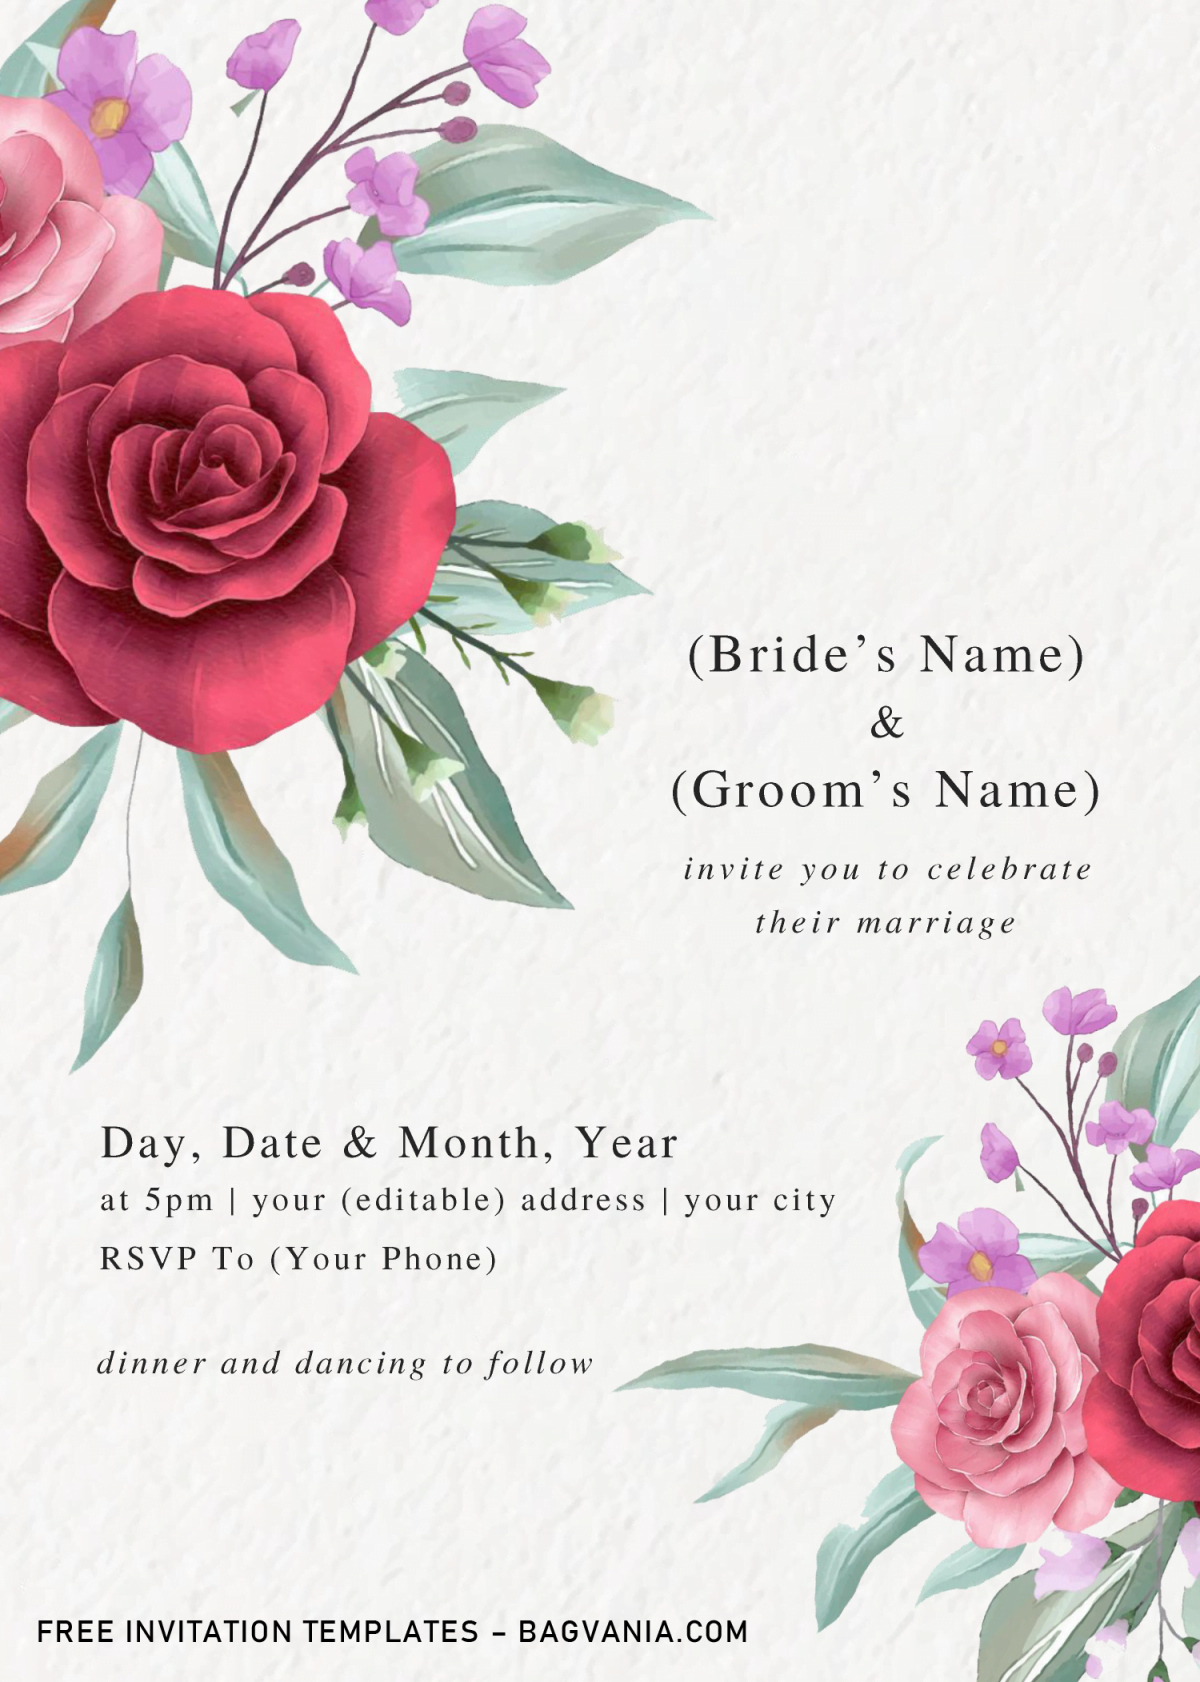 Floral And Greenery Invitation Templates - Editable With Microsoft Word and has elegant font styles